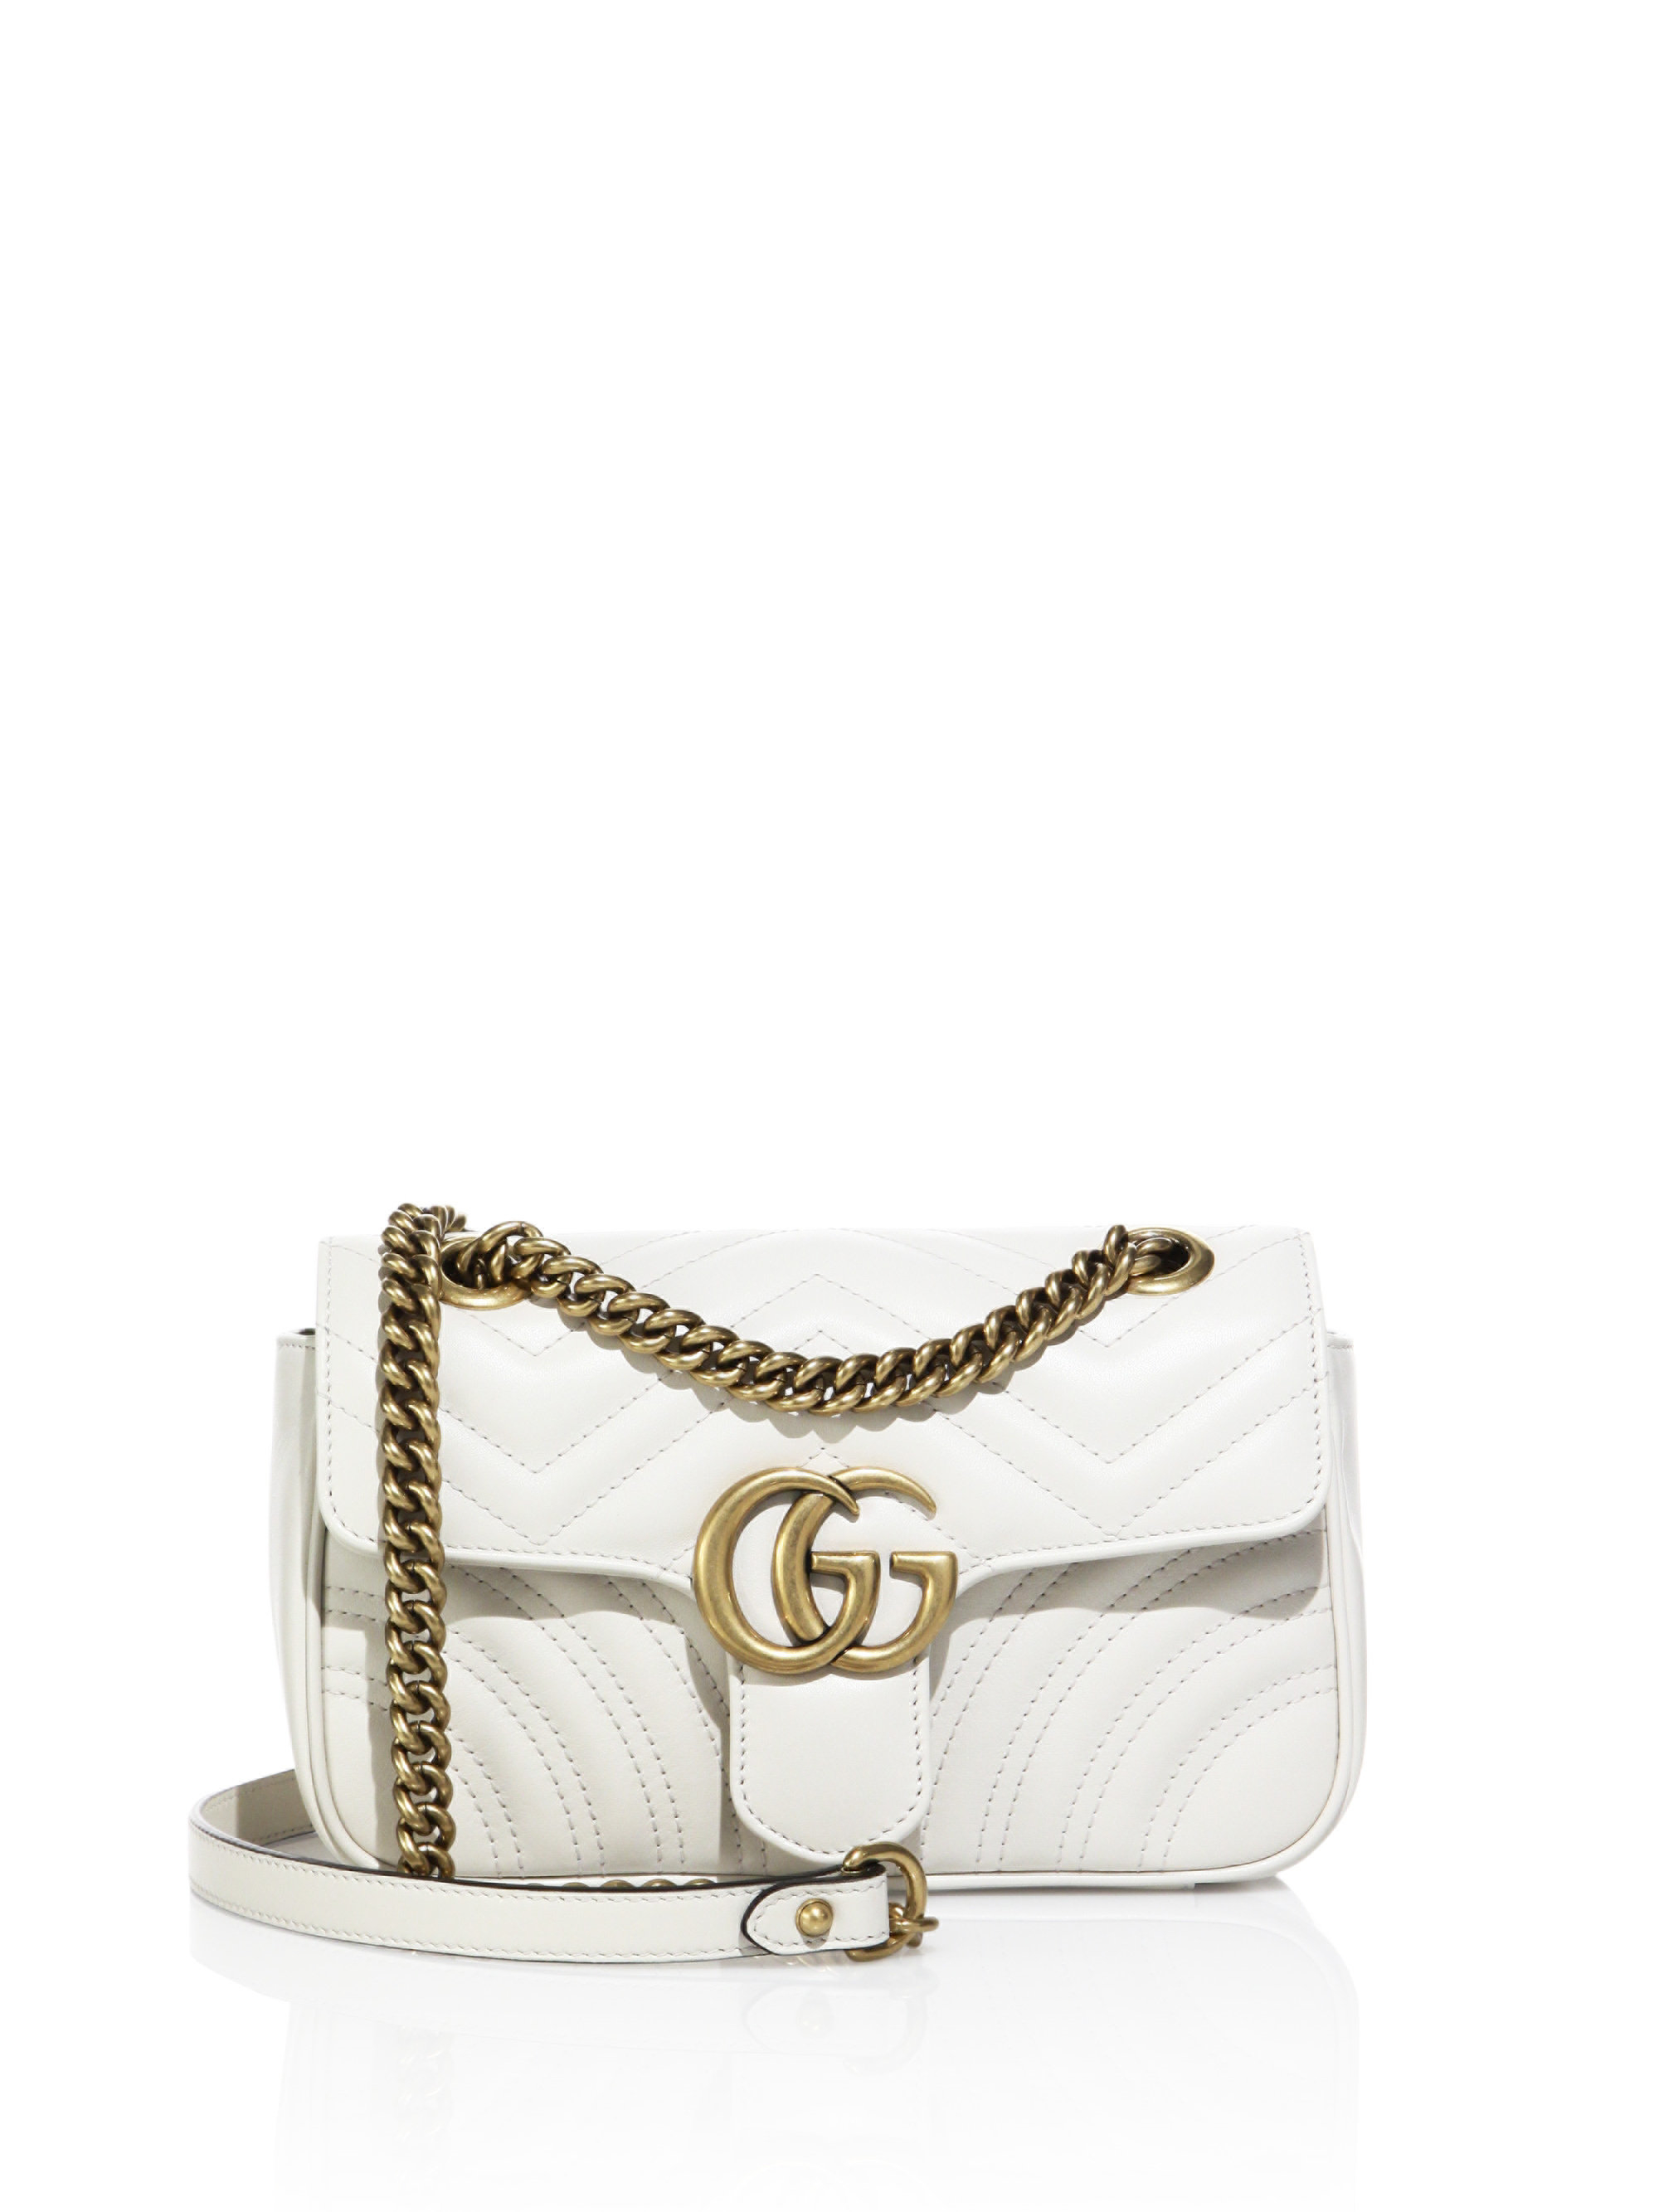 Gucci GG Marmont Mini Quilted Leather Shoulder Bag in White | Lyst